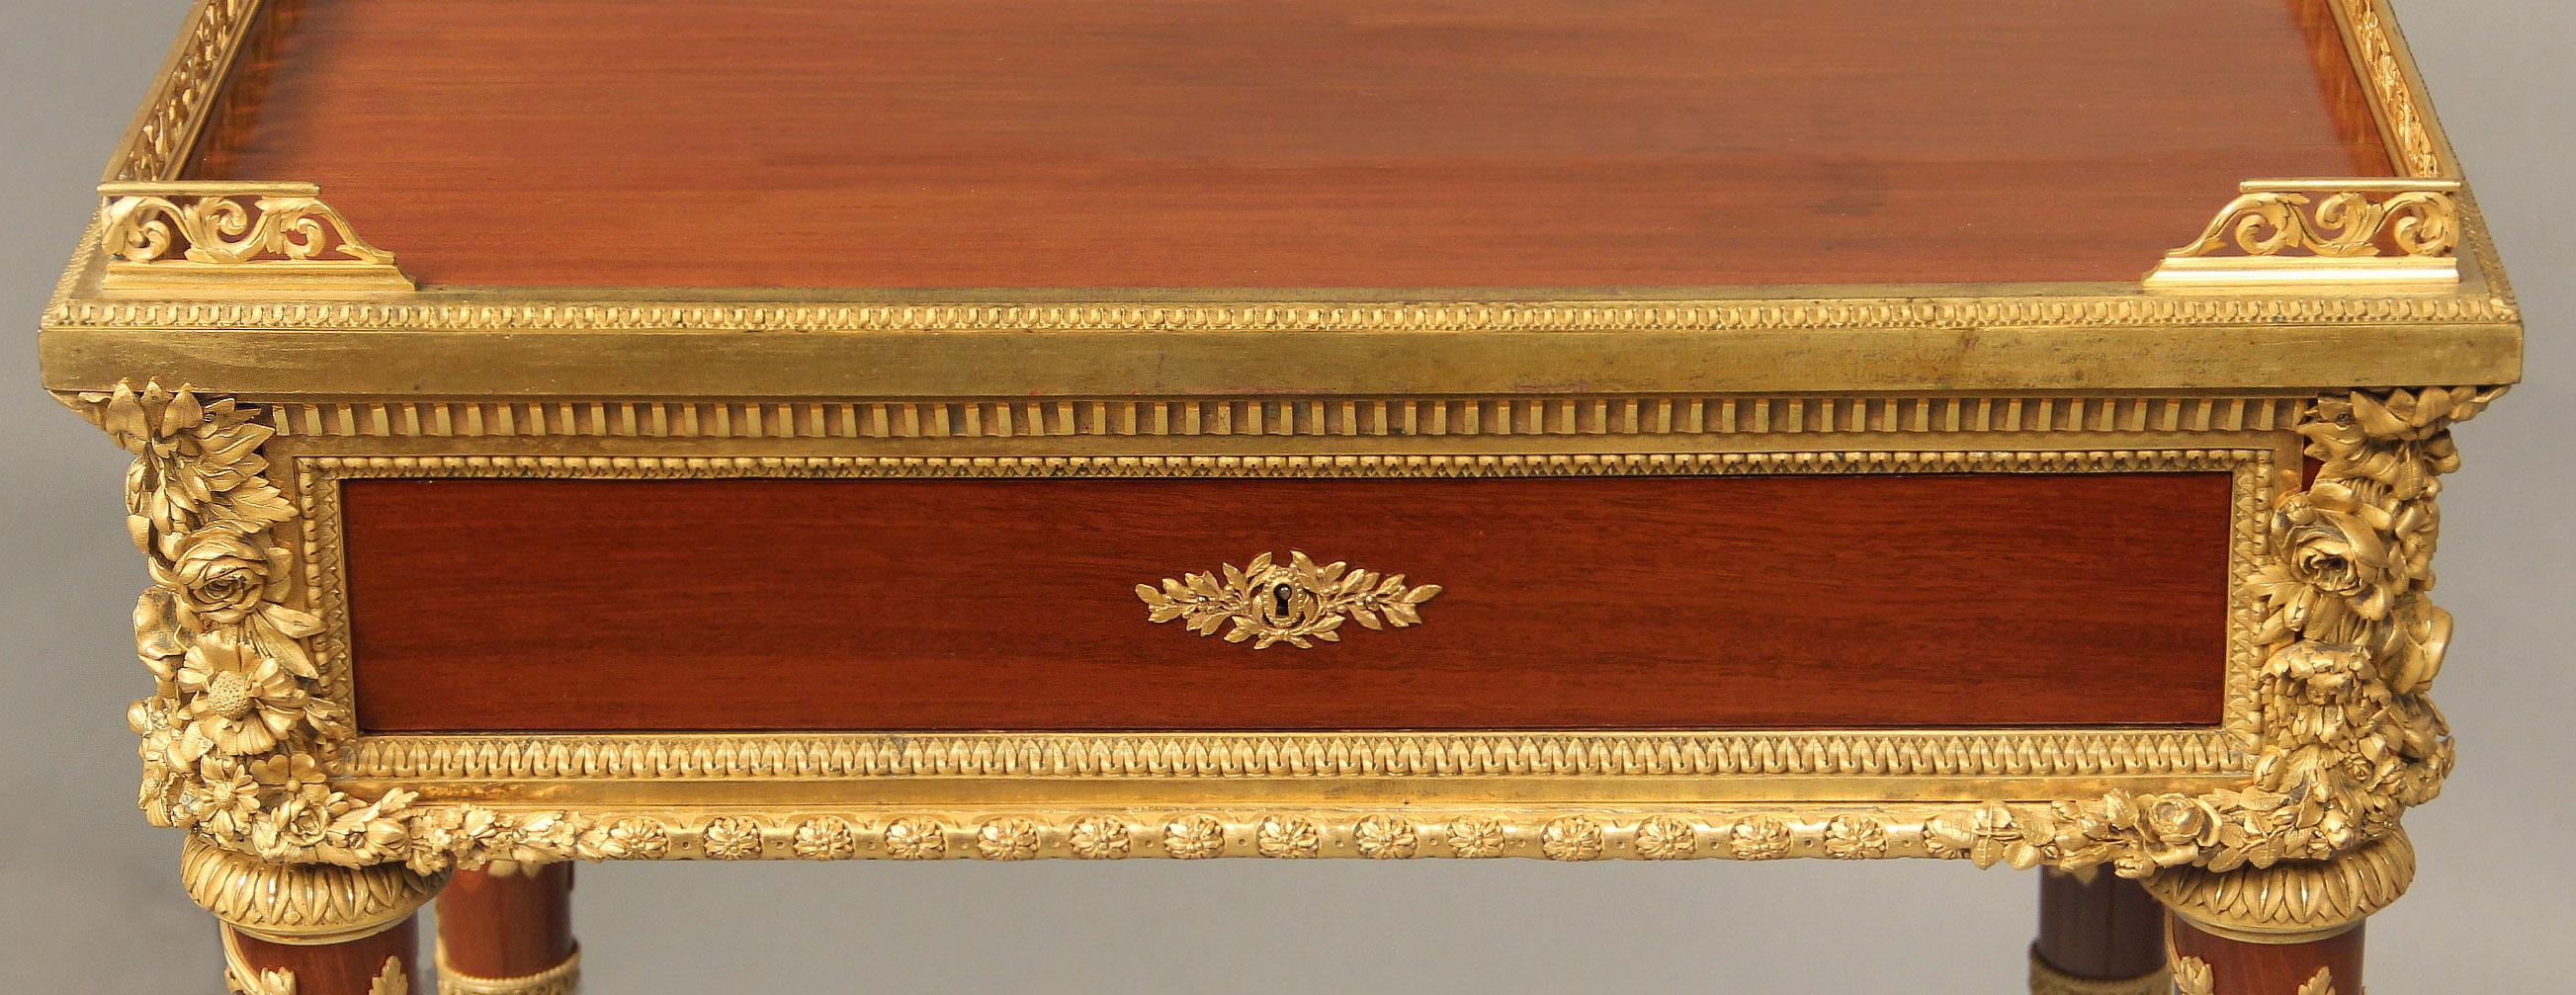 An Excellent Quality Late 19th Century Louis XVI Style Gilt Bronze Mounted Gueridon By Henry Dasson

Henry Dasson

The rectangular top with pierced three-quarter gallery, above a single frieze drawer, the sides each mounted with Minerva’s